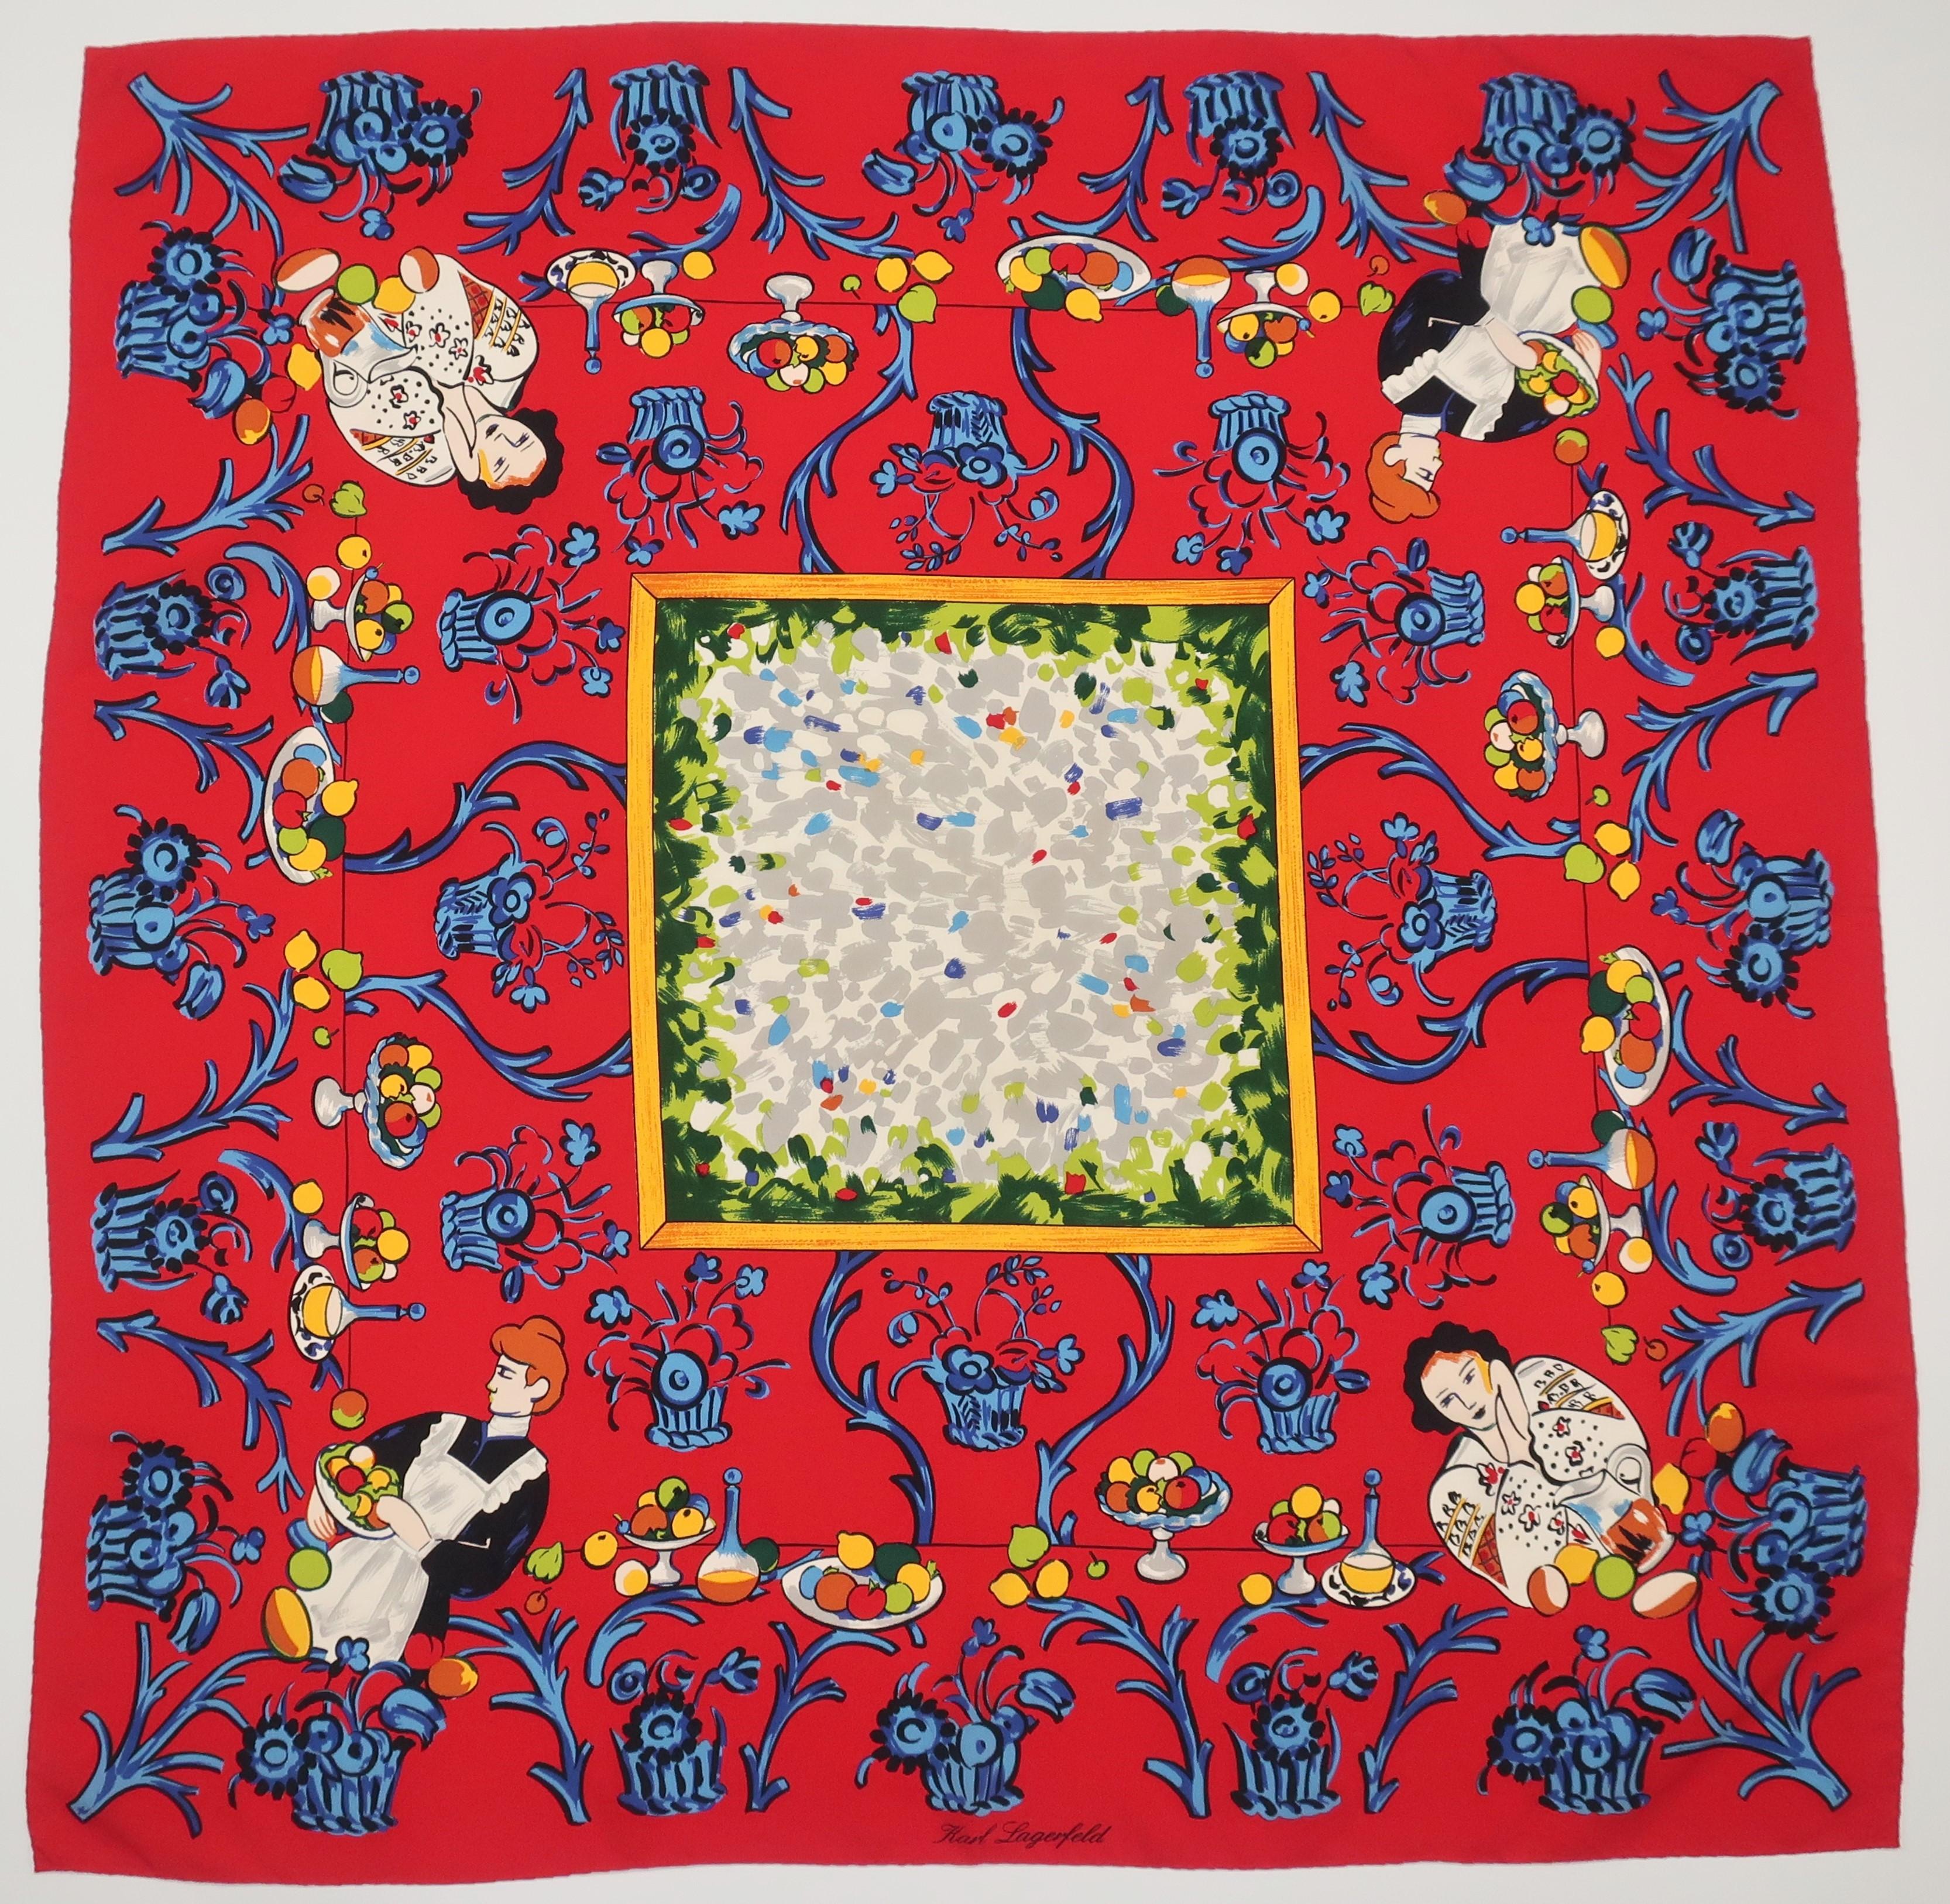 Karl Lagerfeld red silk scarf with images of women, fruit, flowers and wine in shades of blue, green, white, black and yellow.  The design has a beautiful country French aesthetic.  'Karl Lagerfeld' is incorporated into the print with no additional